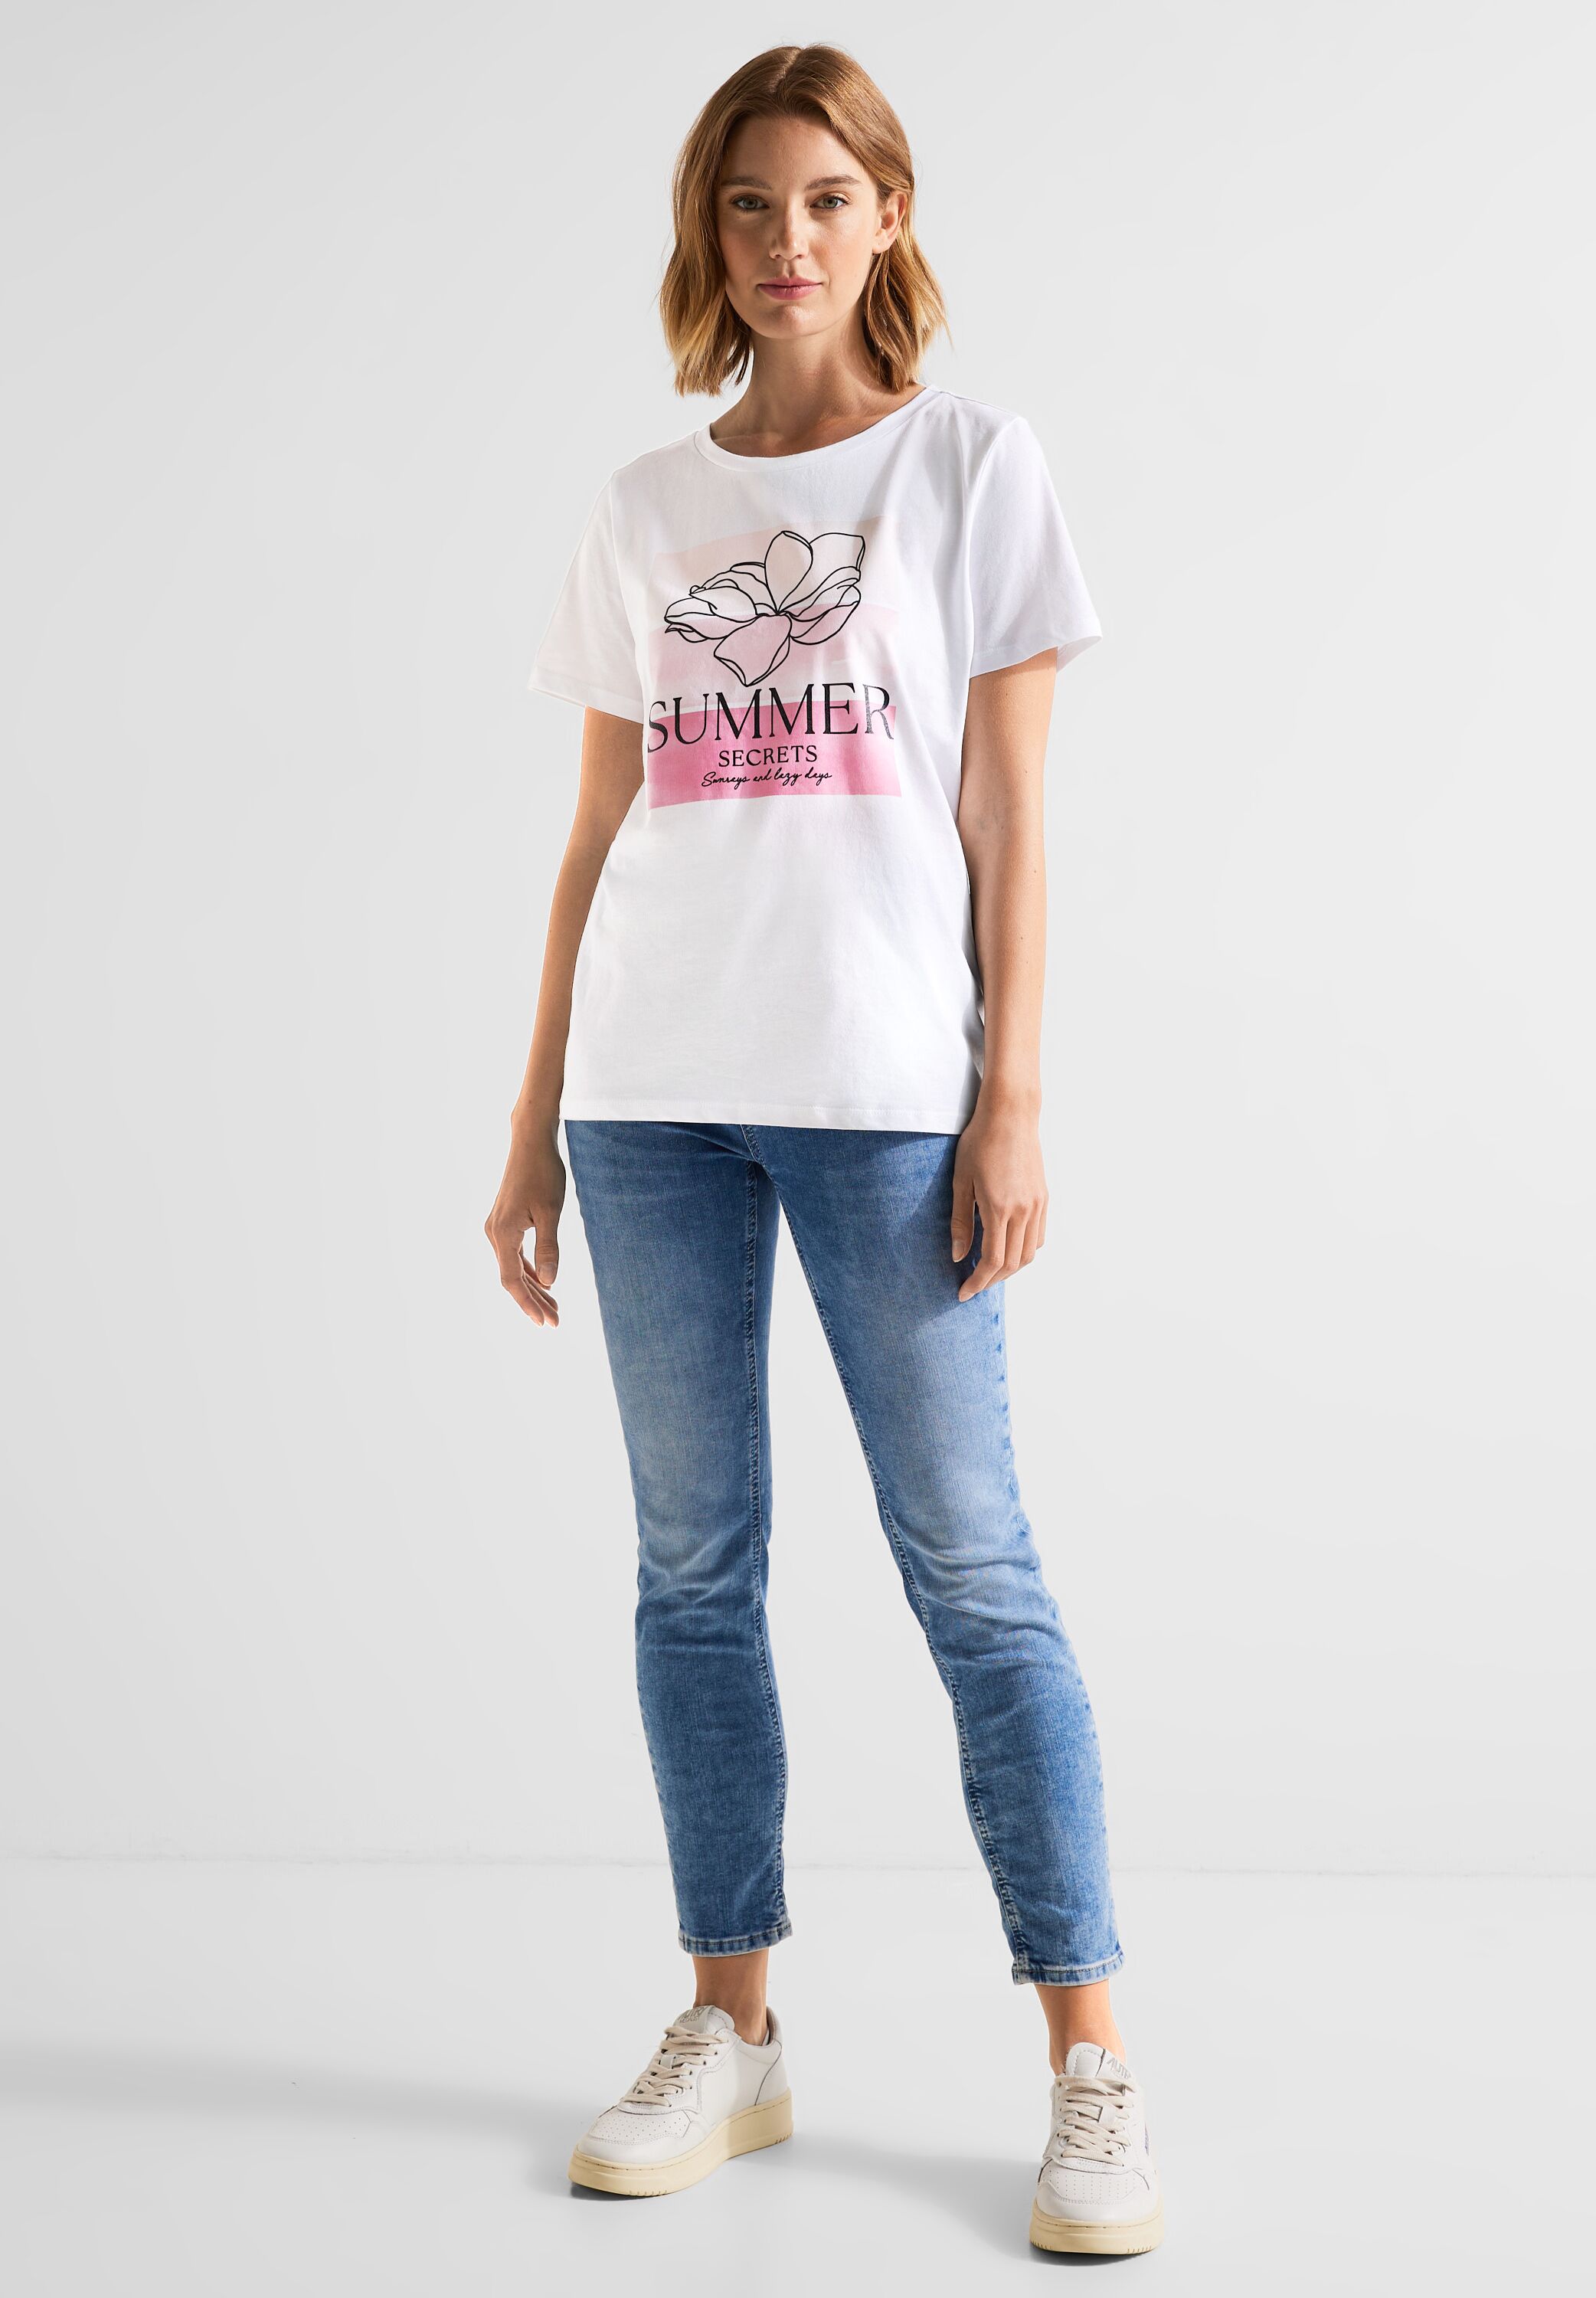 - reduziert A320181-34647 Mode Berry Rose im One T-Shirt CONCEPT in SALE Street